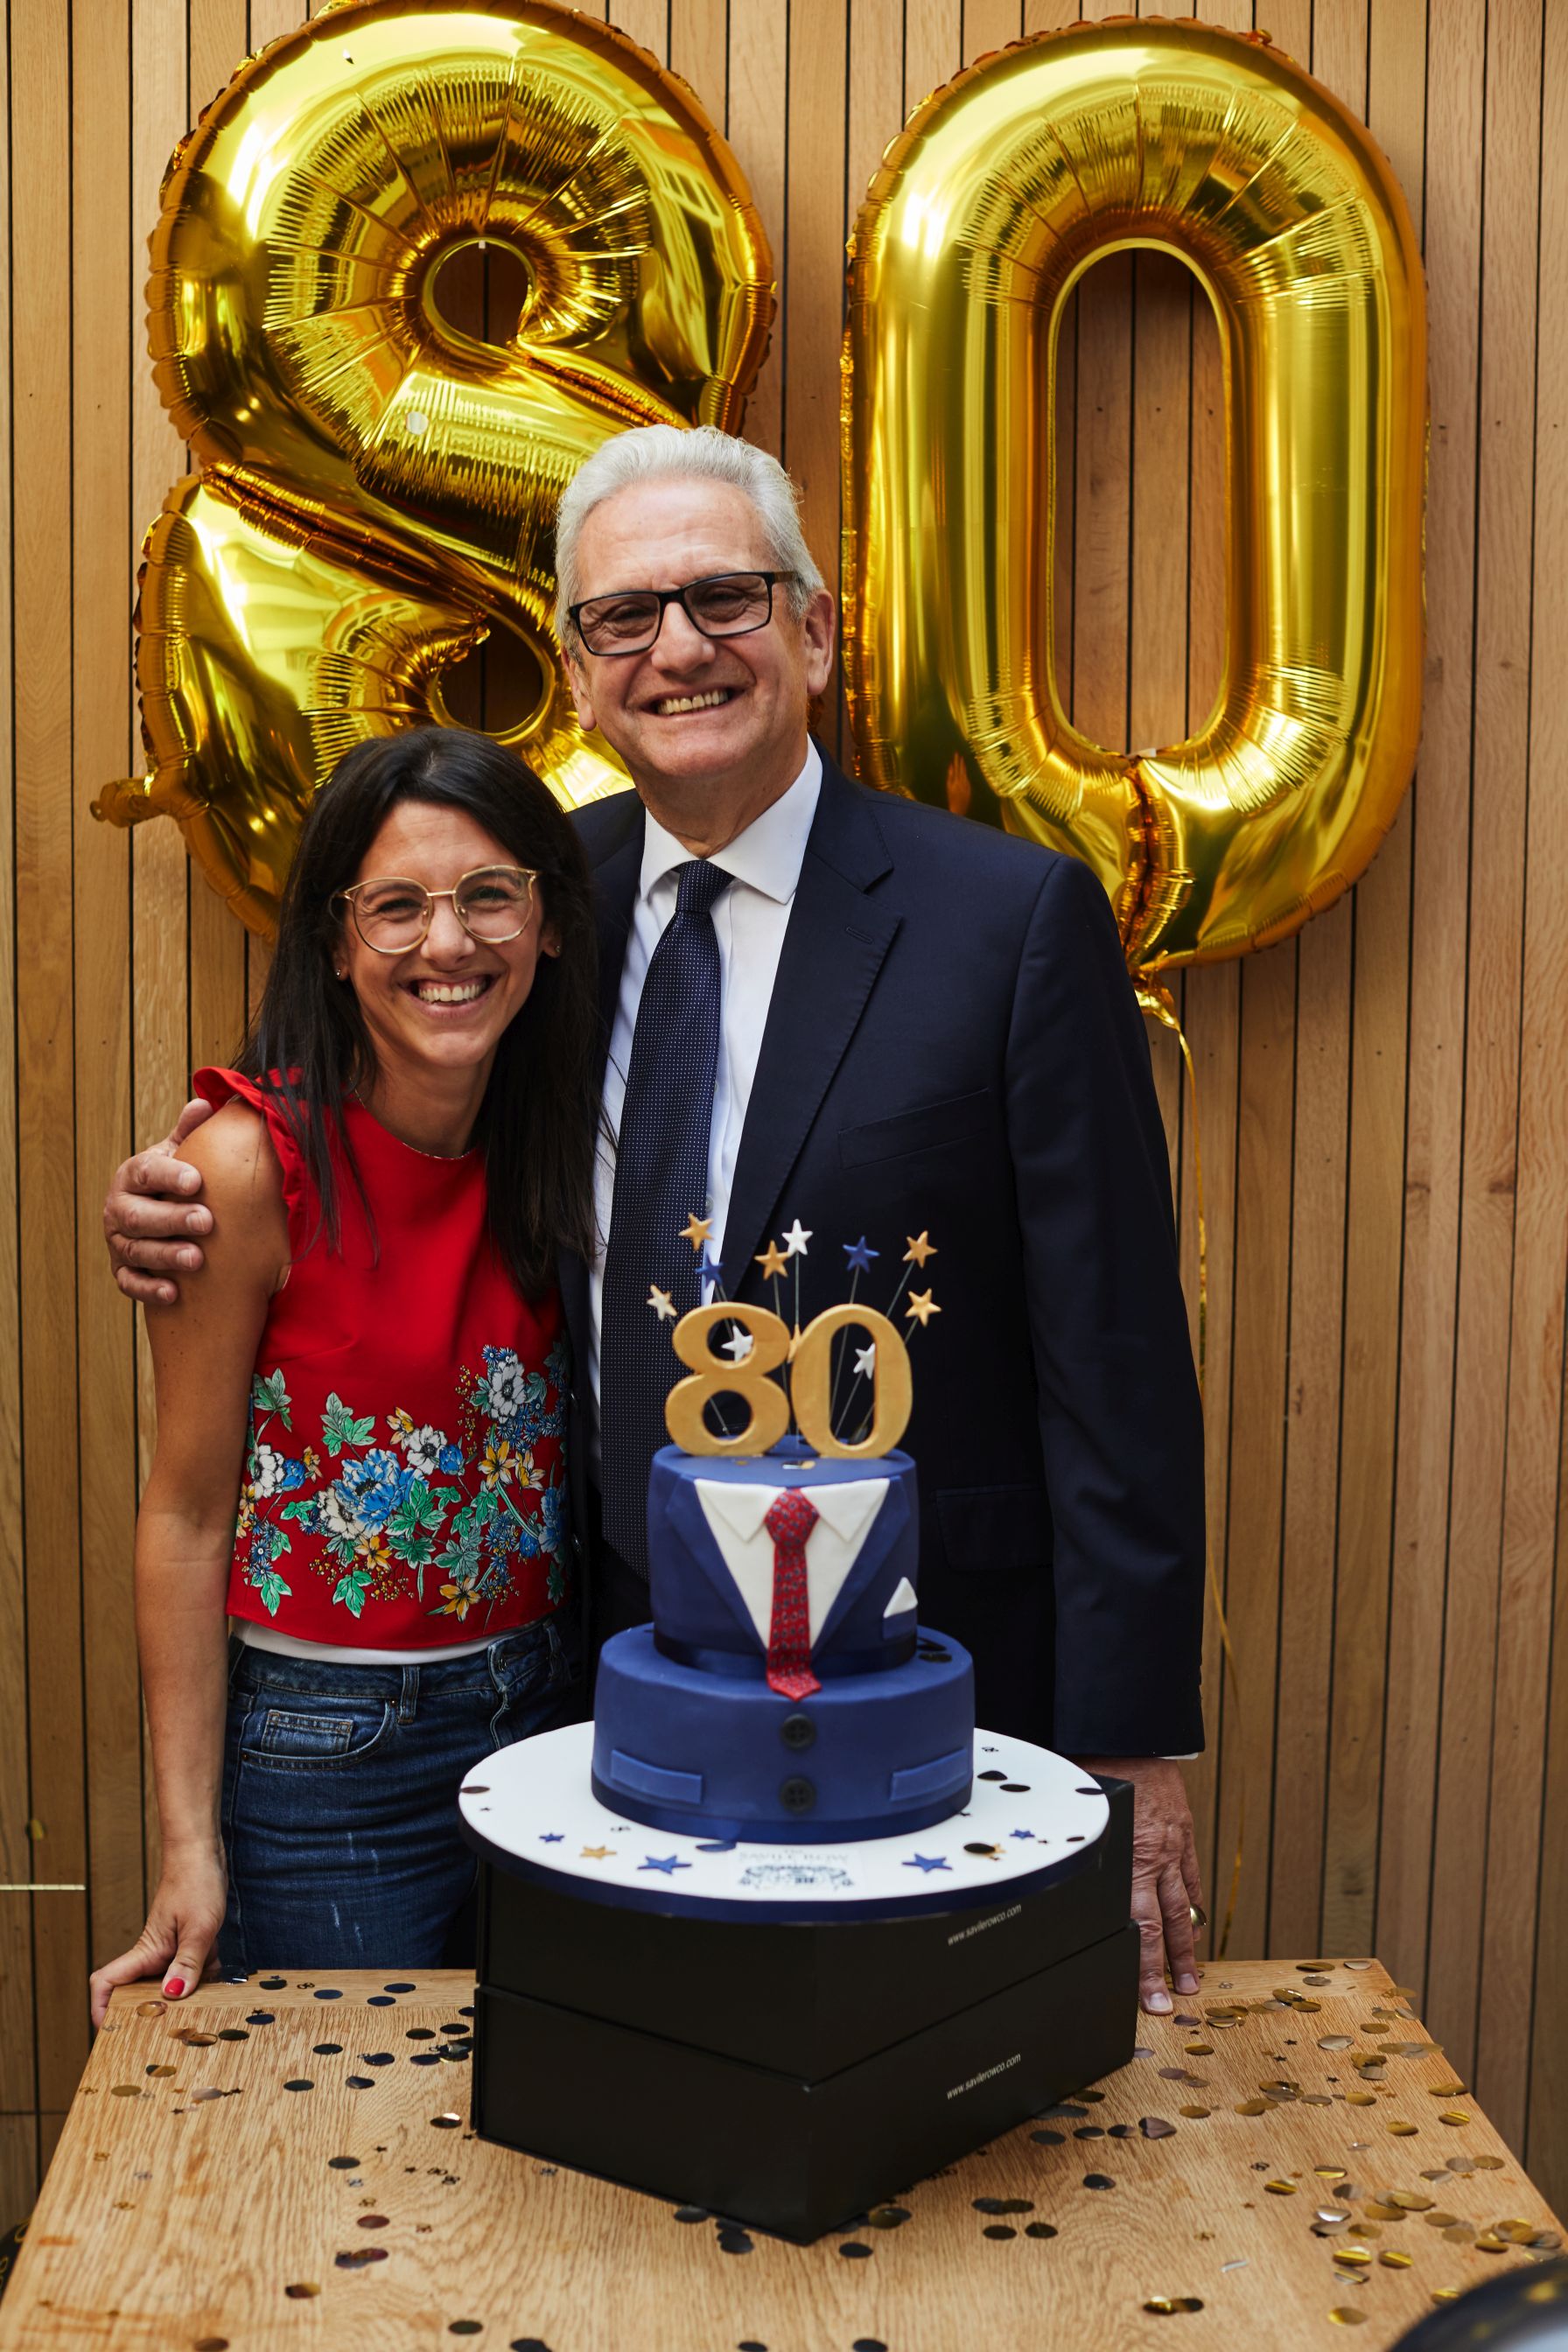 A woman and man stand together side by side smiling widely. There are two big '8' and '0' balloons behind them and a cake decorated like a suit with an '80' on top.